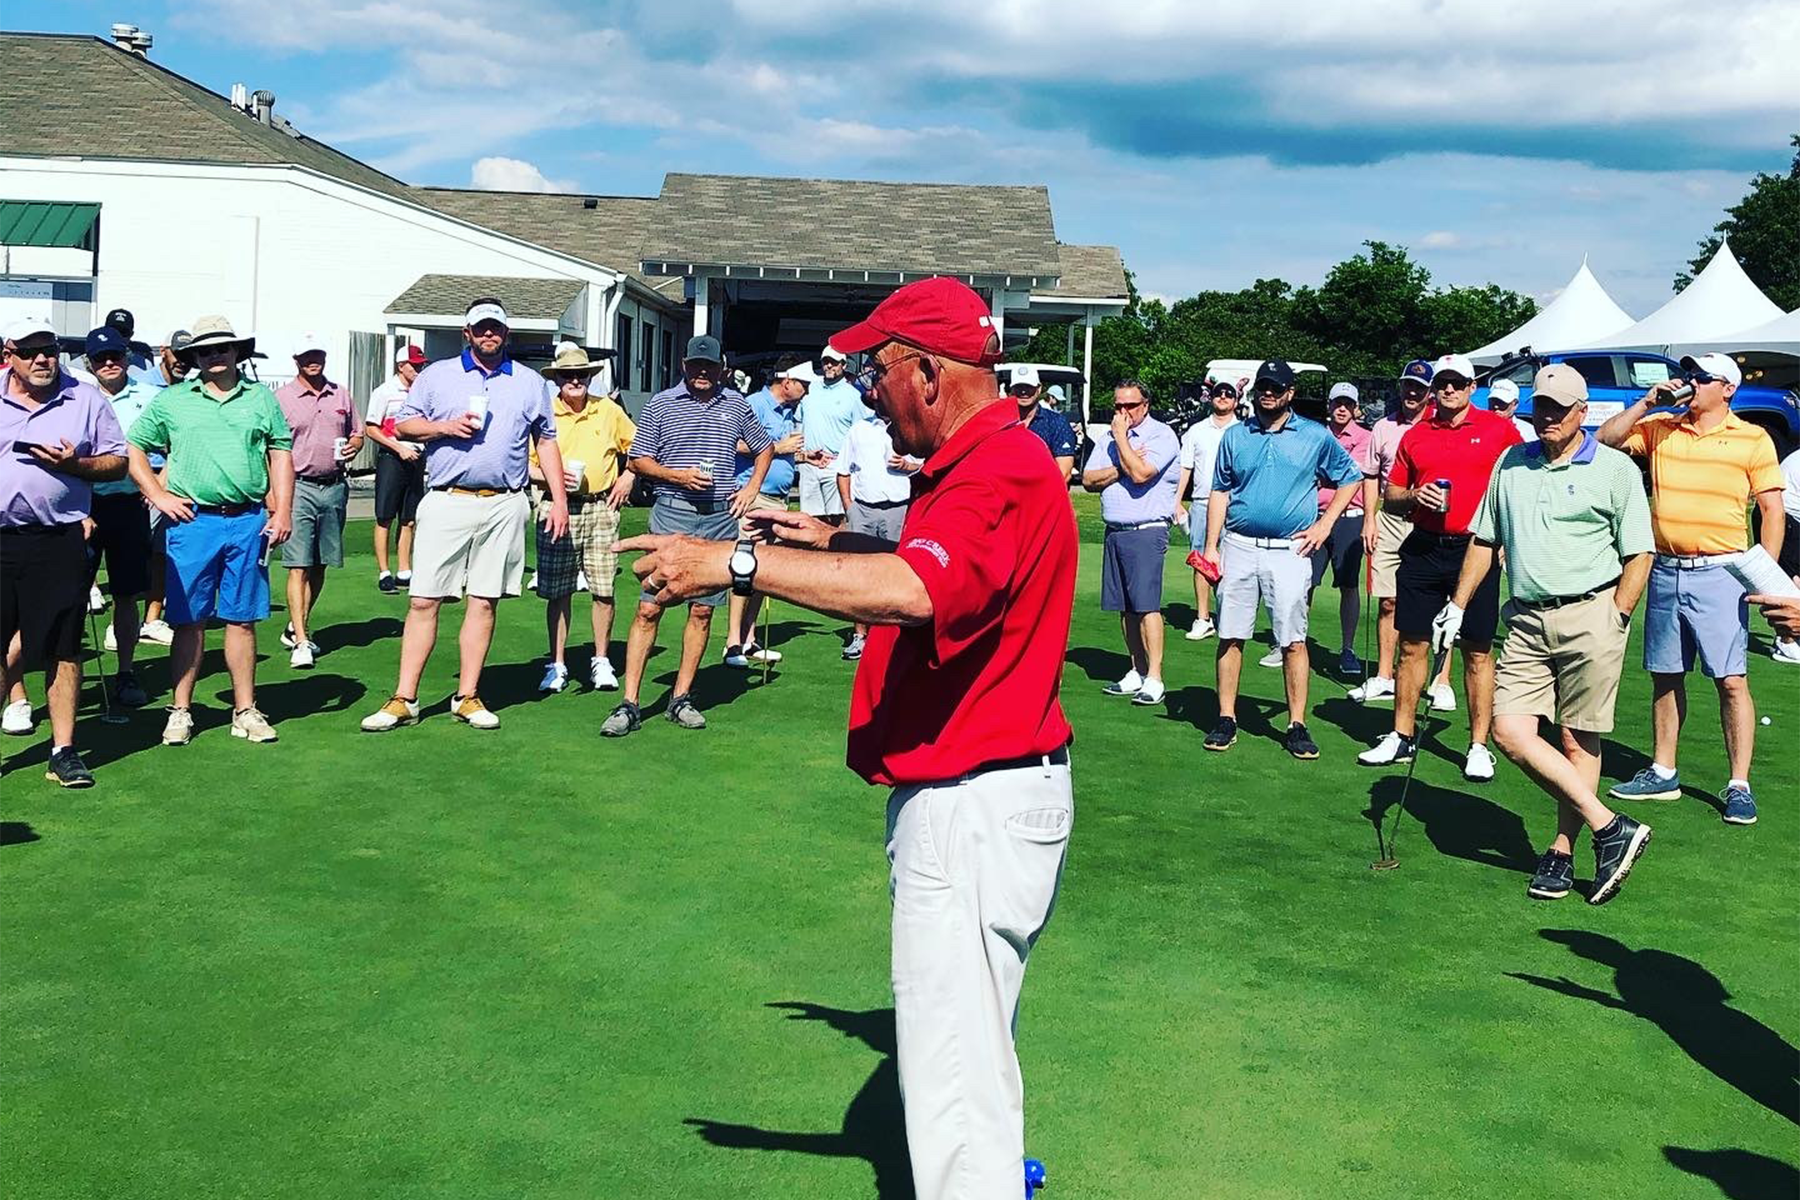 Bill Agler, PGA, working the crowd at the start of an event. 